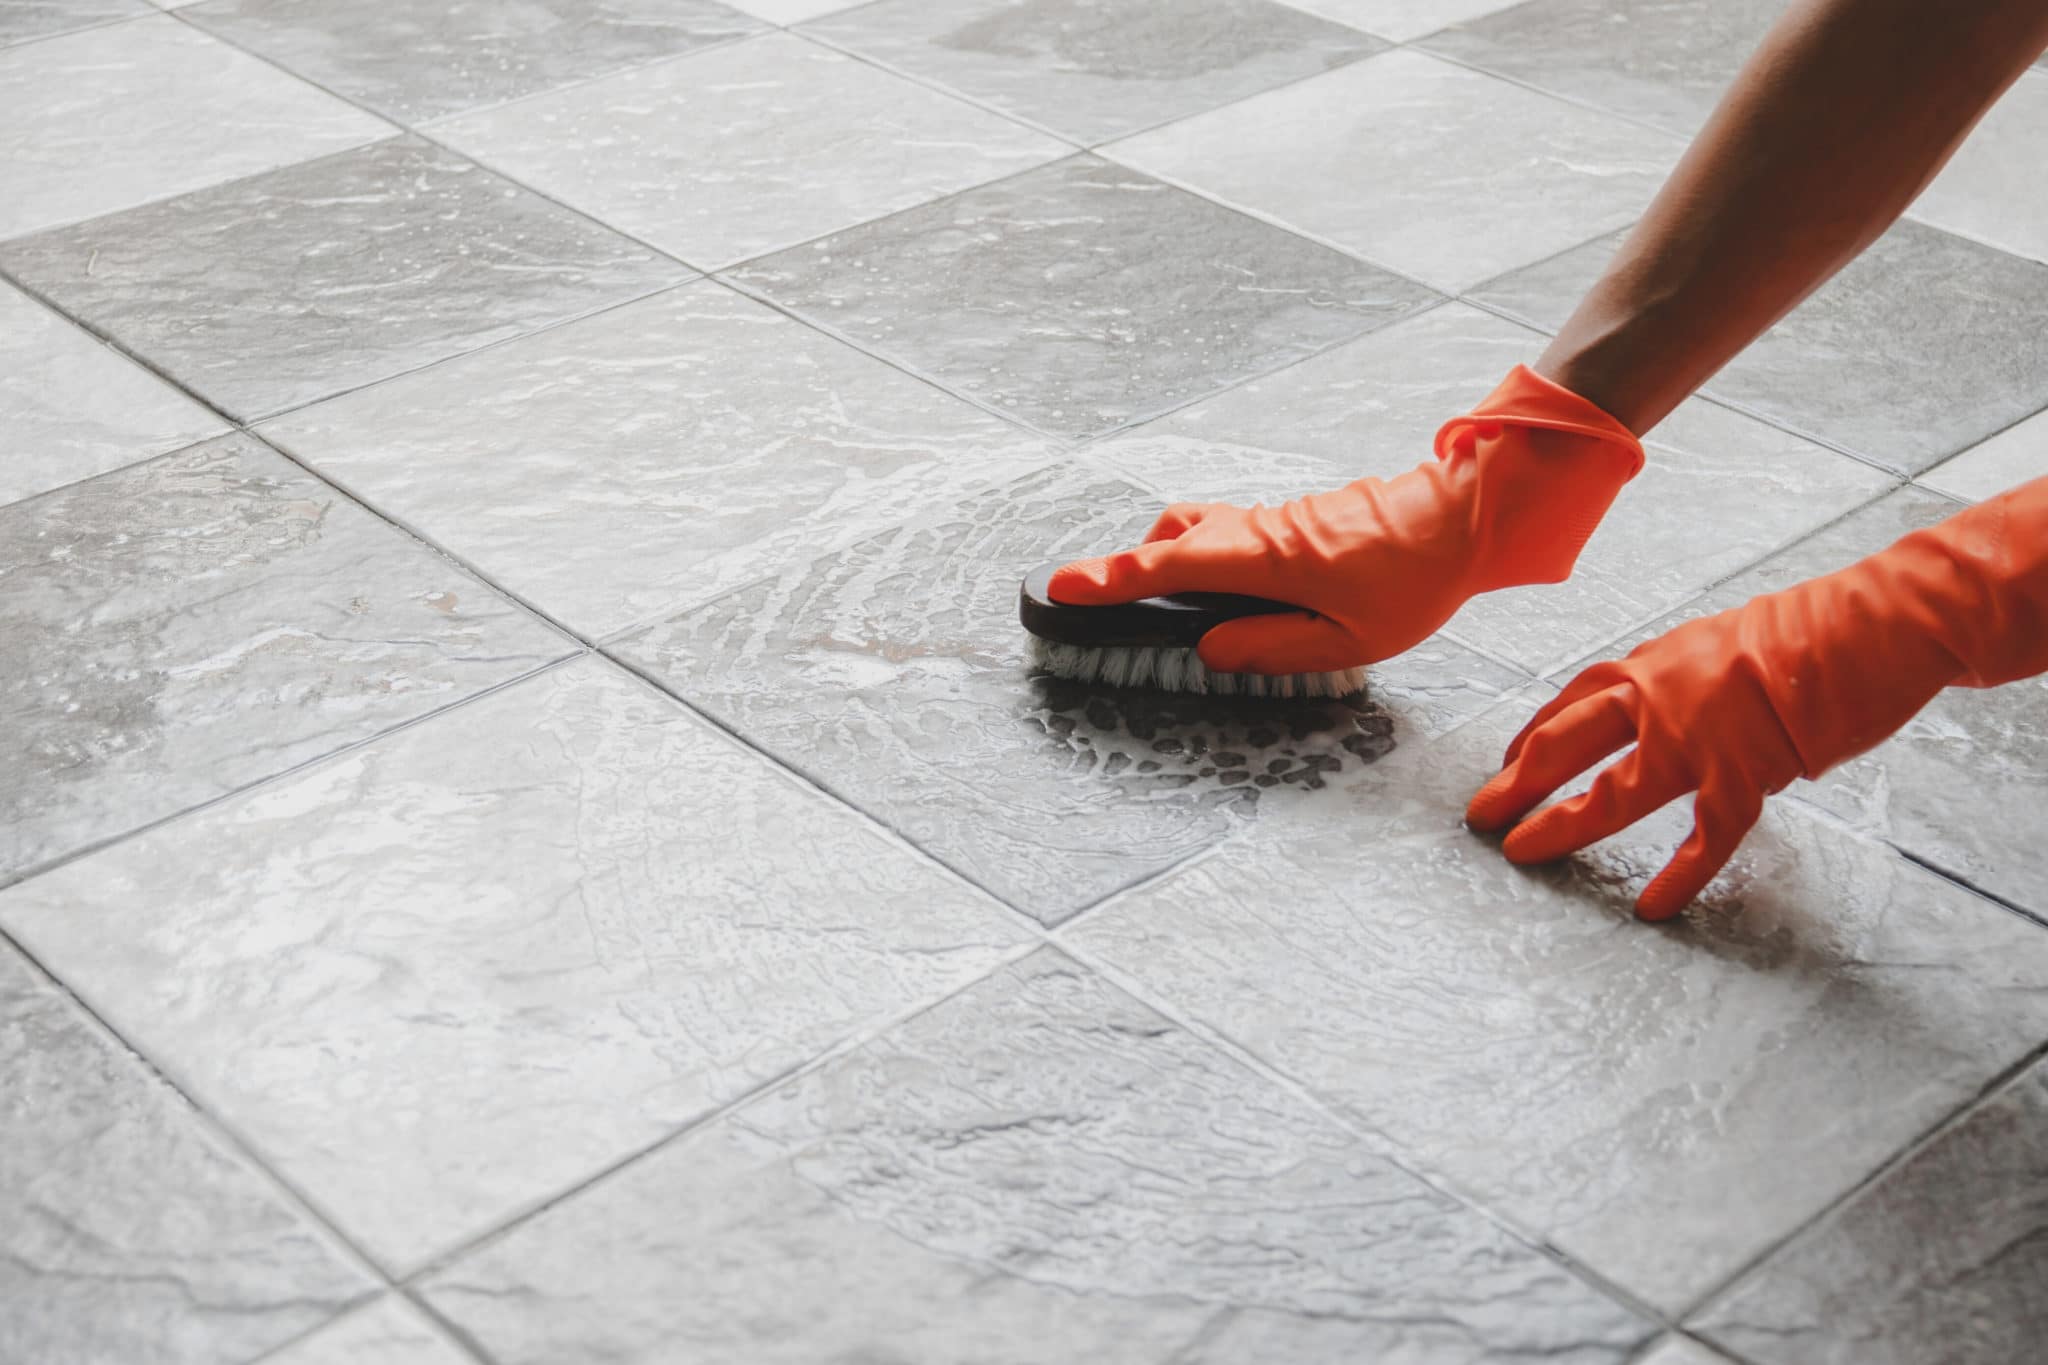 Clean Porcelain Tiles, How To Clean Porcelain Tile That Looks Like Wood